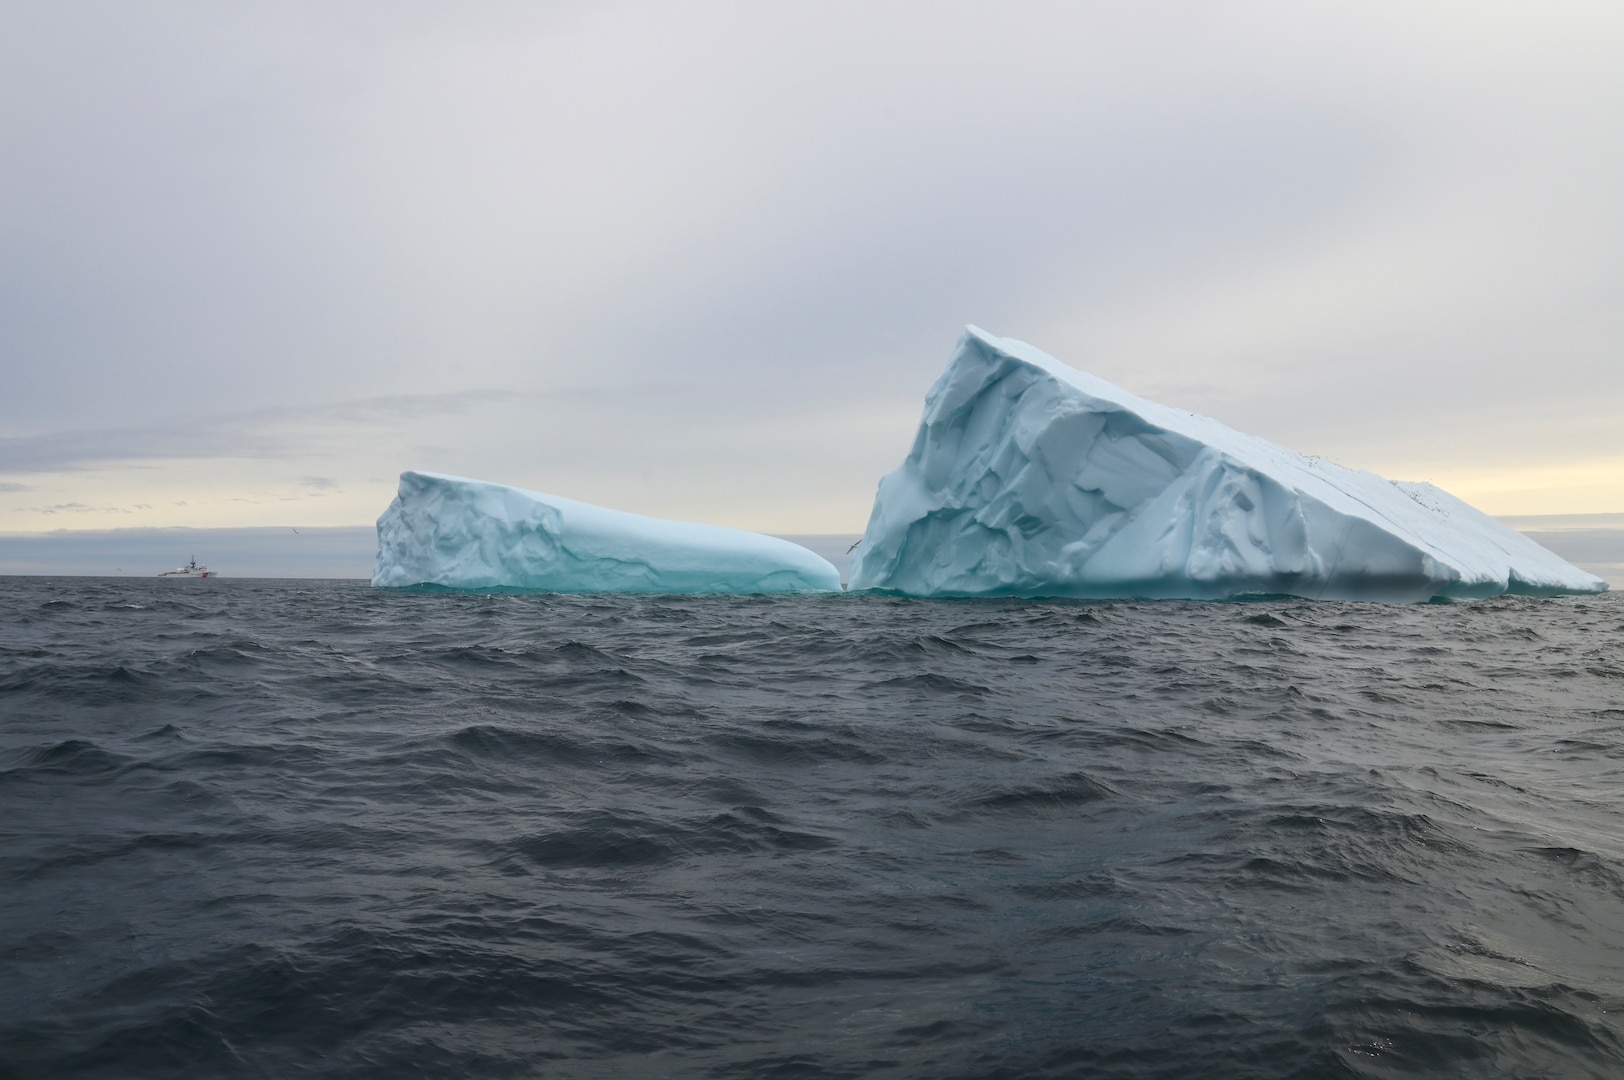 The U.S. Coast Guard Cutter Forward (WMEC 911) steams near an iceberg in the Atlantic Ocean, Aug. 22, 2023. Forward deployed in support of Op Nanook, an annual Canadian-led exercise that offers an opportunity to work with partners to advance shared maritime objectives. (U.S. Coast Guard photo by Petty Officer 3rd Class Mikaela McGee)